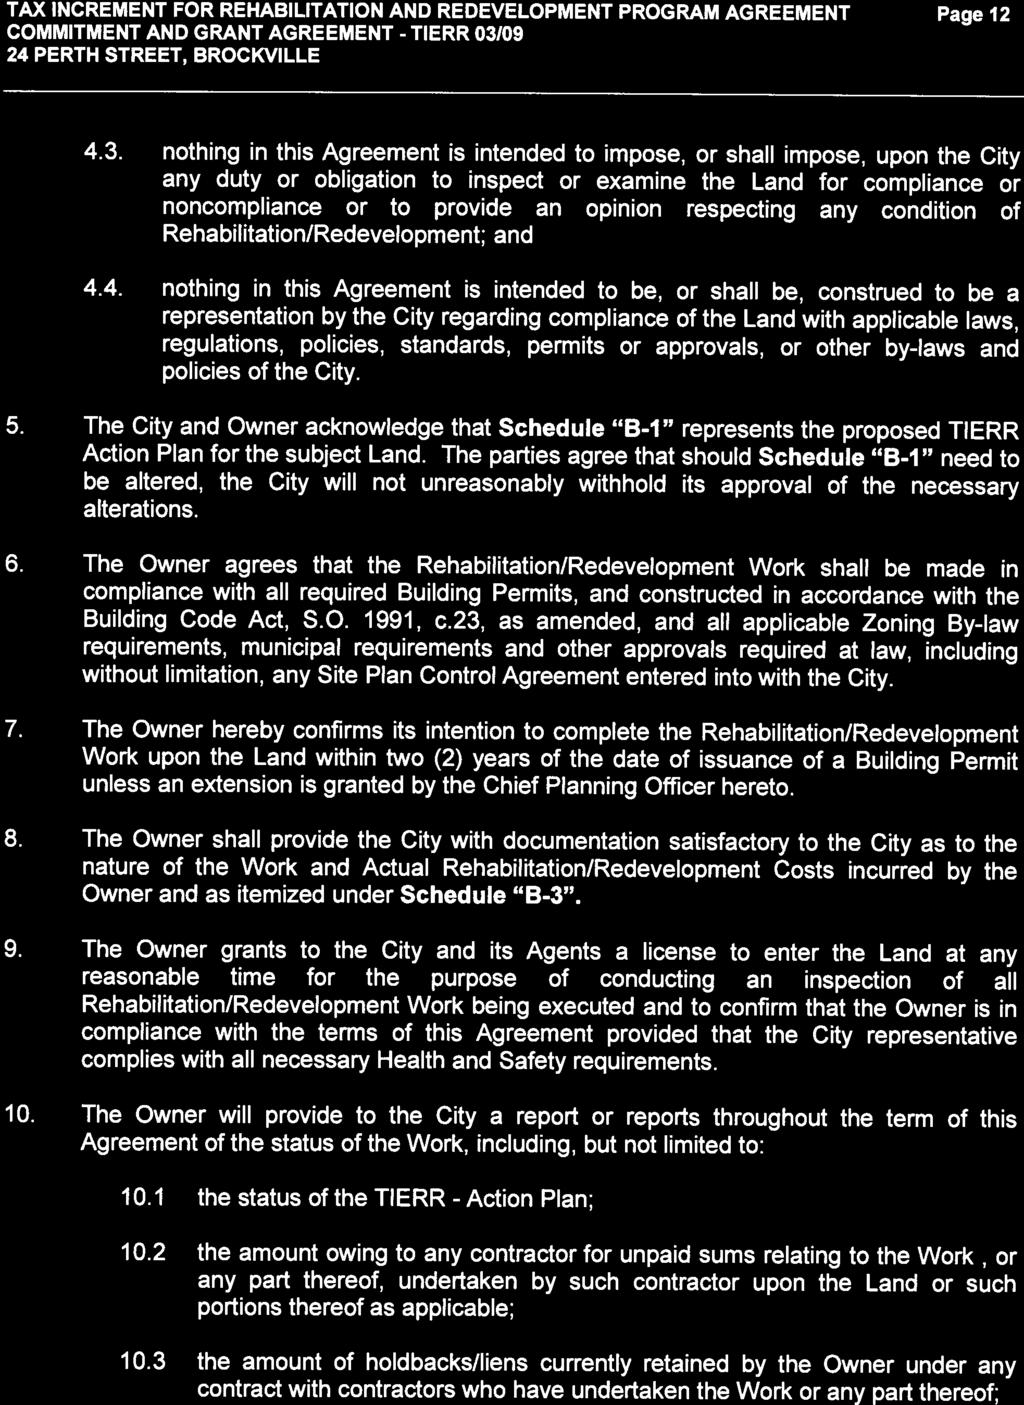 TAX INCREMENT FOR REHABILITATION AND REDEVELOPMENT PROGRAM AGREEMENT Page 12 COMMITMENT AND GRANT AGREEMENT - TIERR 031